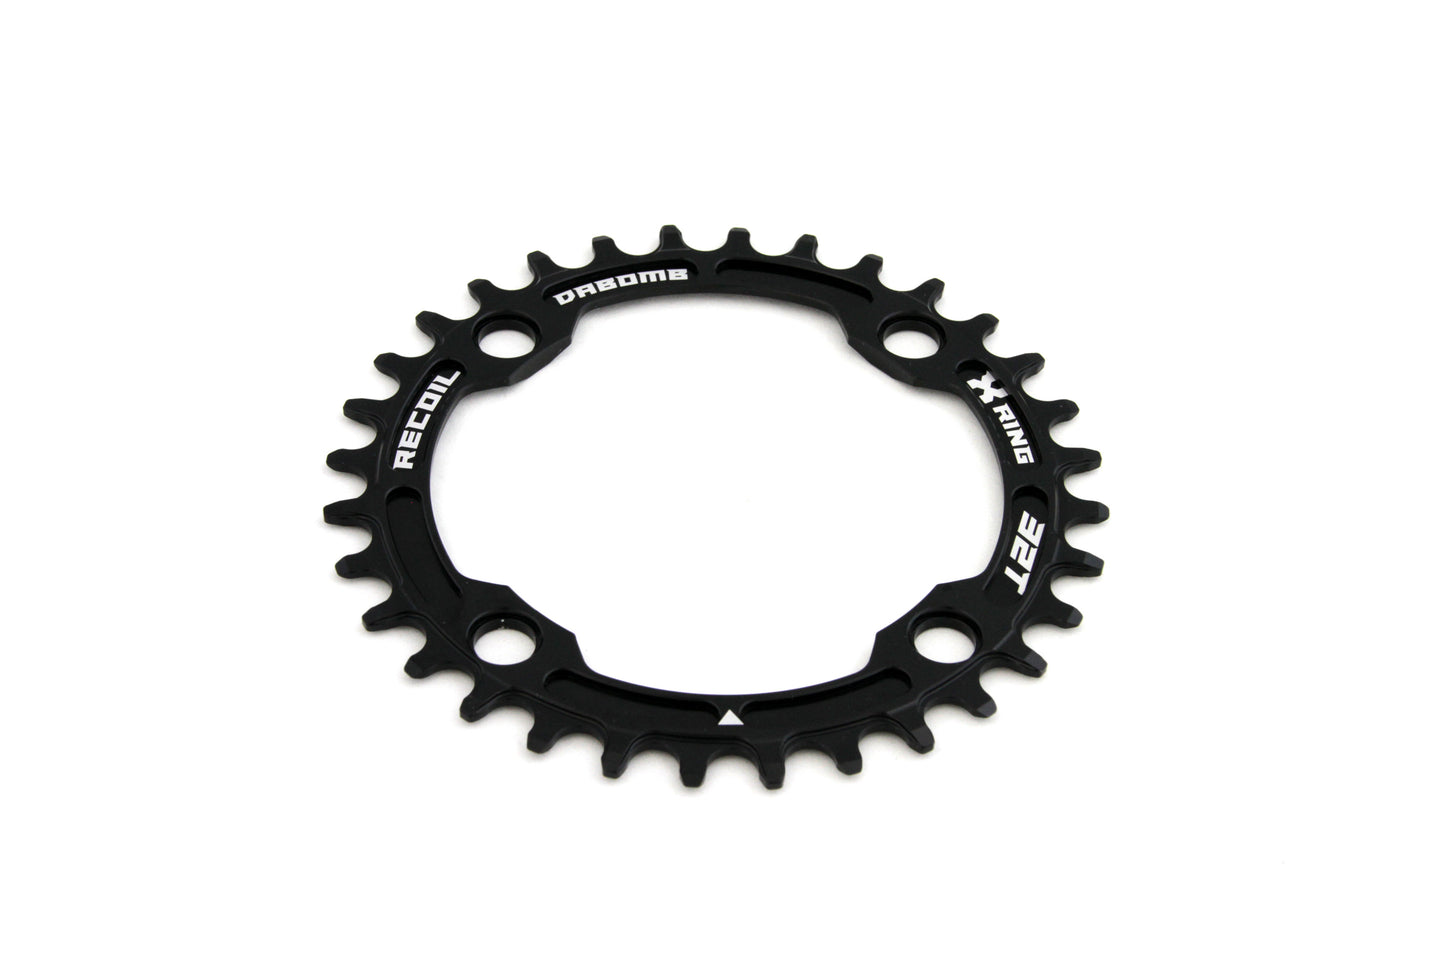 DaBomb X-Ring 32T Chain Ring Narrow-Wide Designed for 104 BCD Cranks - Black